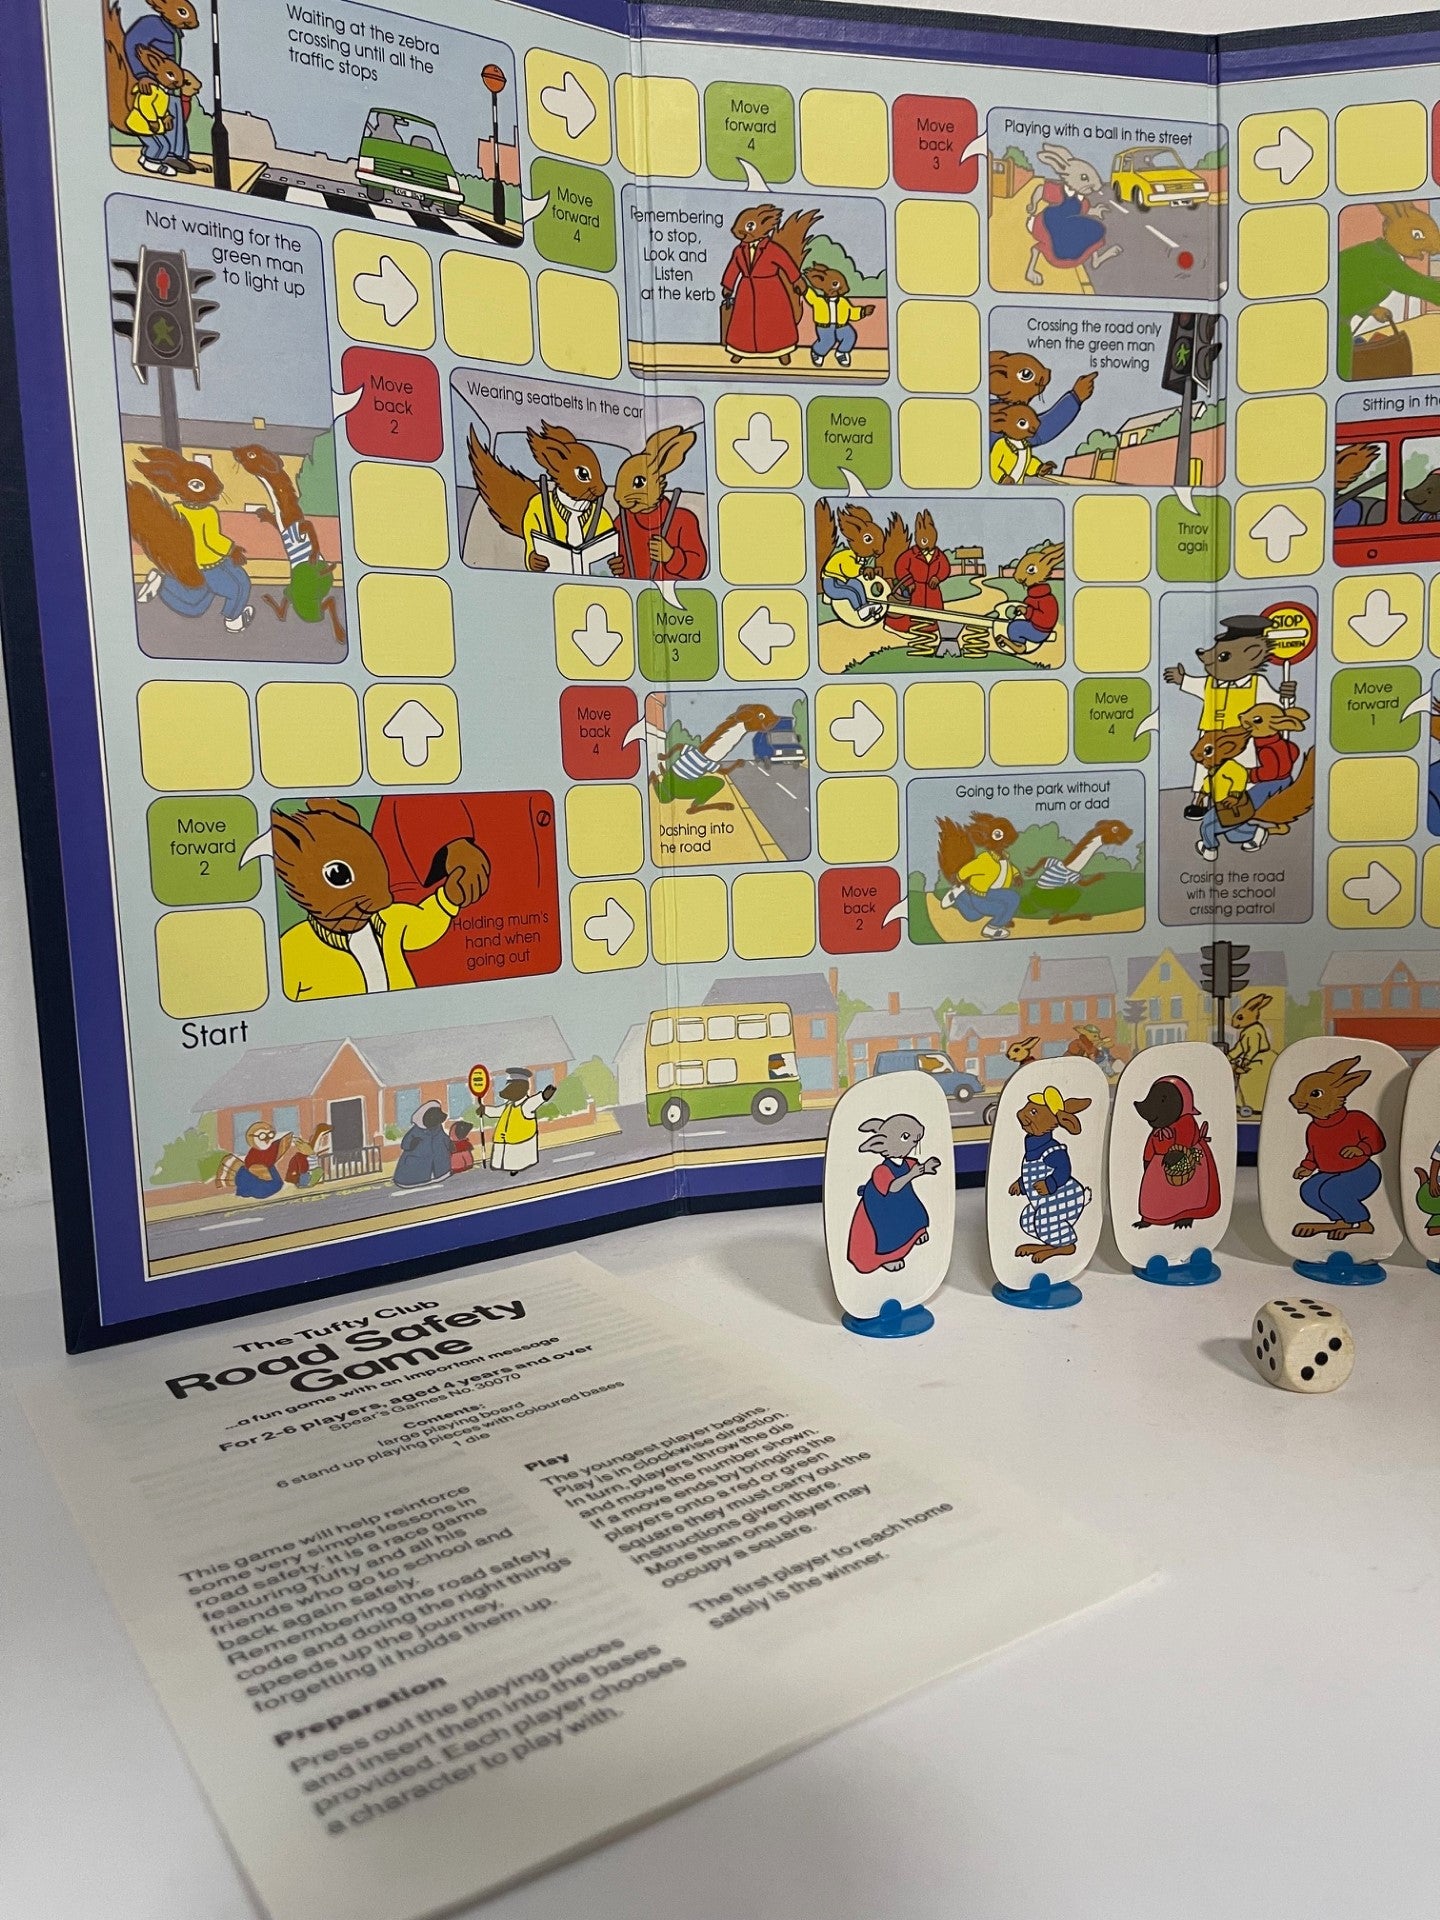 The Tufty Club Road Safety Game